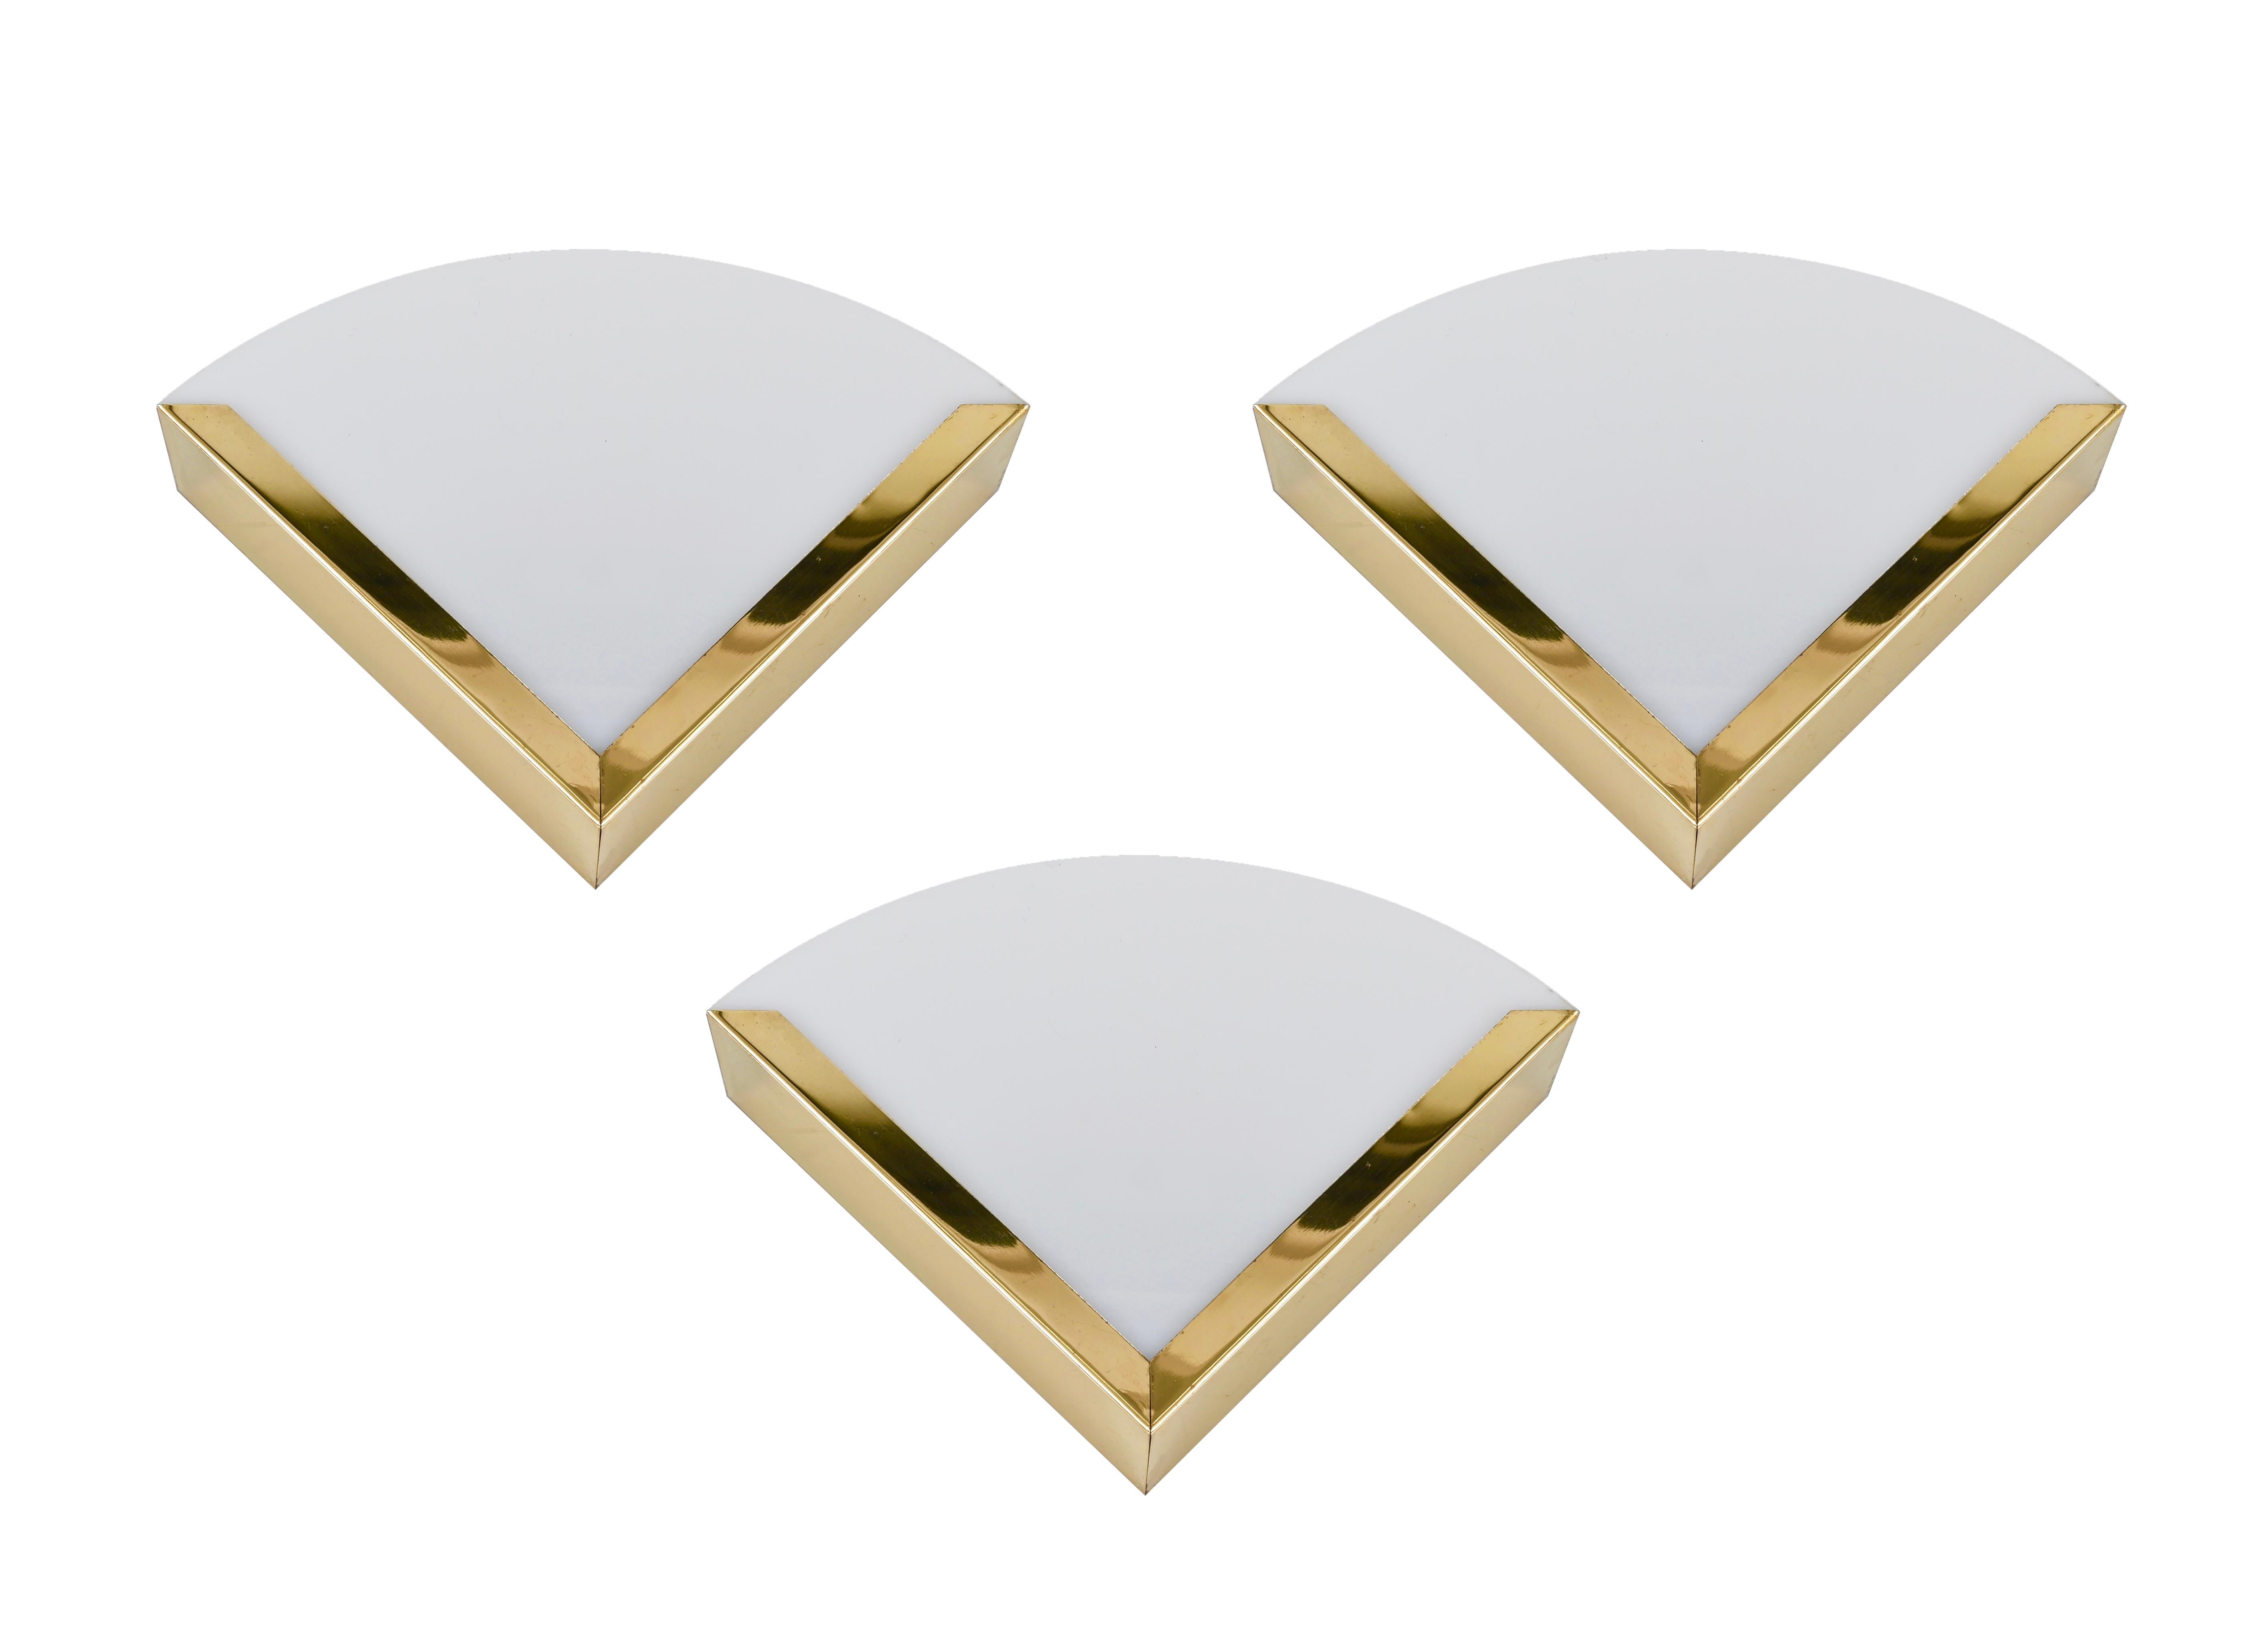 Italian Triangular Sconces in Brass and White Perspex, Italy 1970s For Sale 10